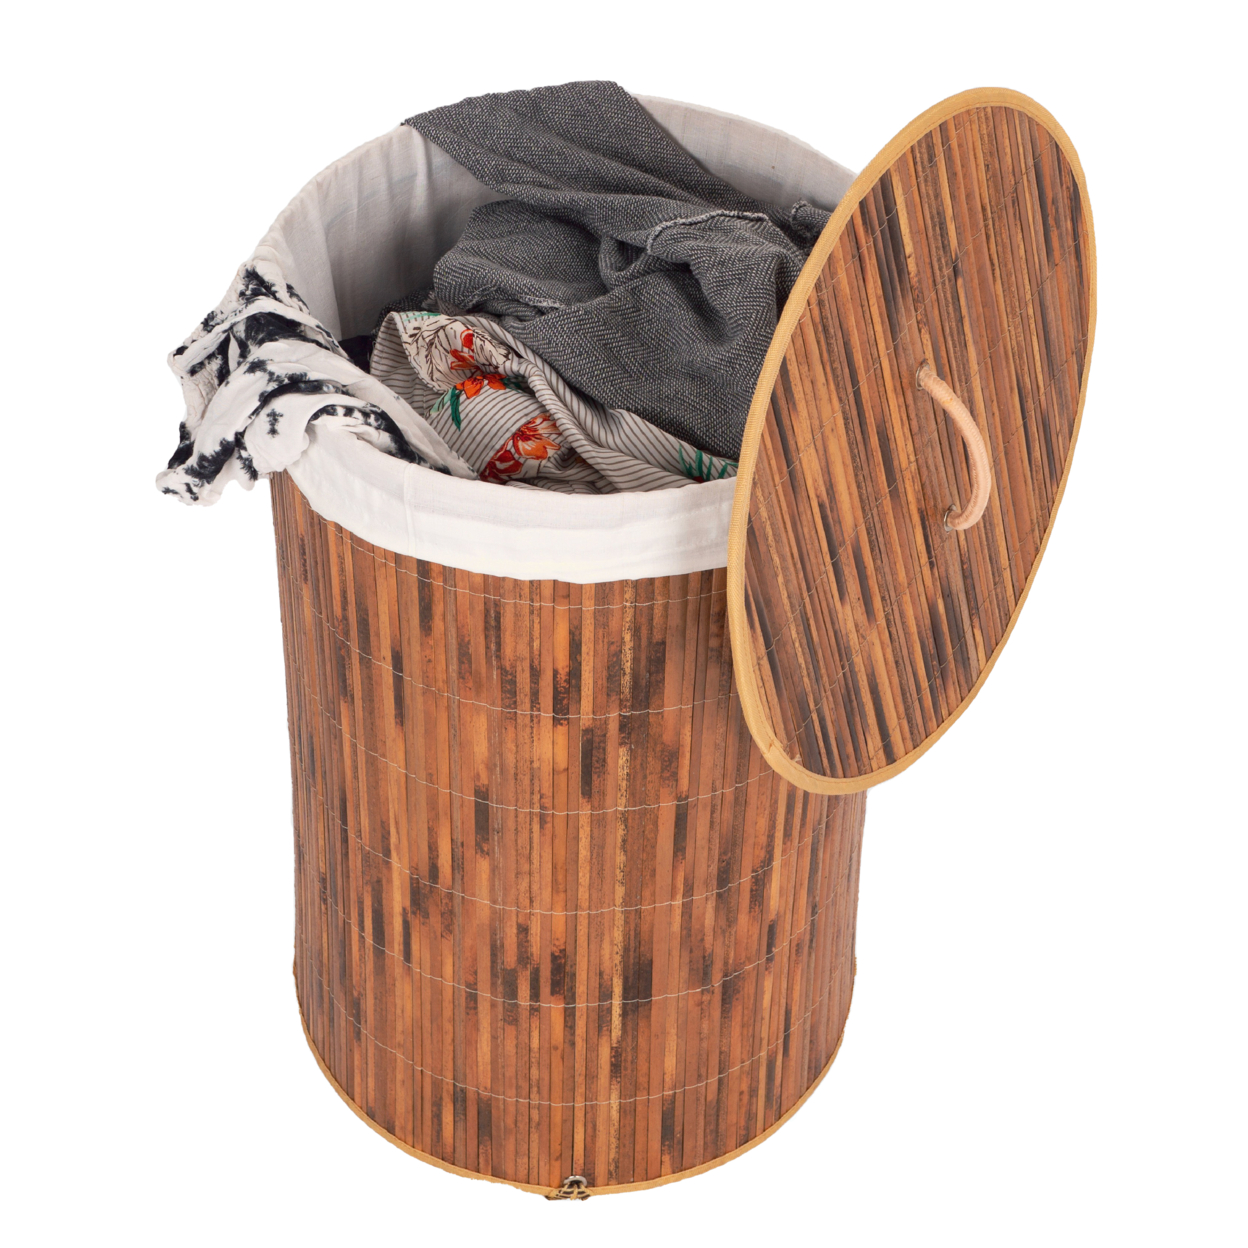 Foldable Laundry Hamper With Lid And Handles For Easy Carrying - Bamboo Rectangle